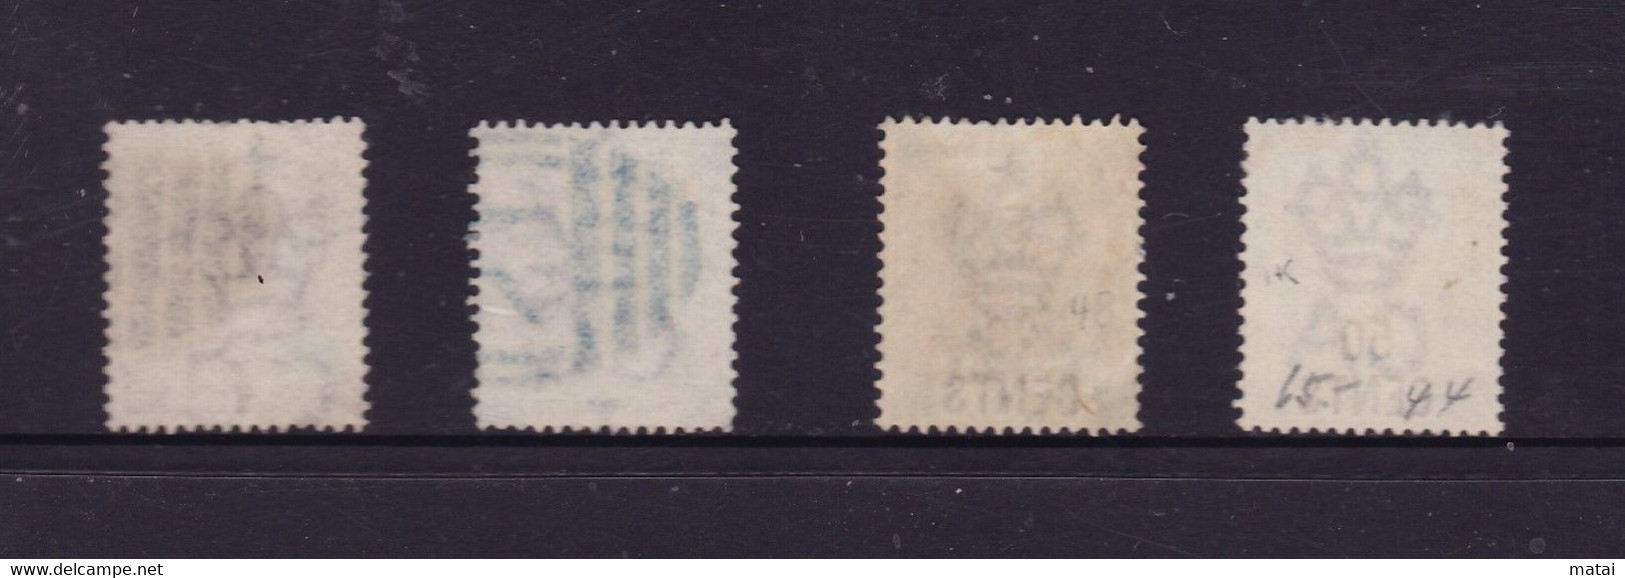 HONG KONG 2 C. + 12 C. ，  20 CENTS On 30 C, 50 CENTS On 48 C., Both Cancelled, Vf, Ovpr. With Chinese Caracters Also - 1941-45 Occupation Japonaise